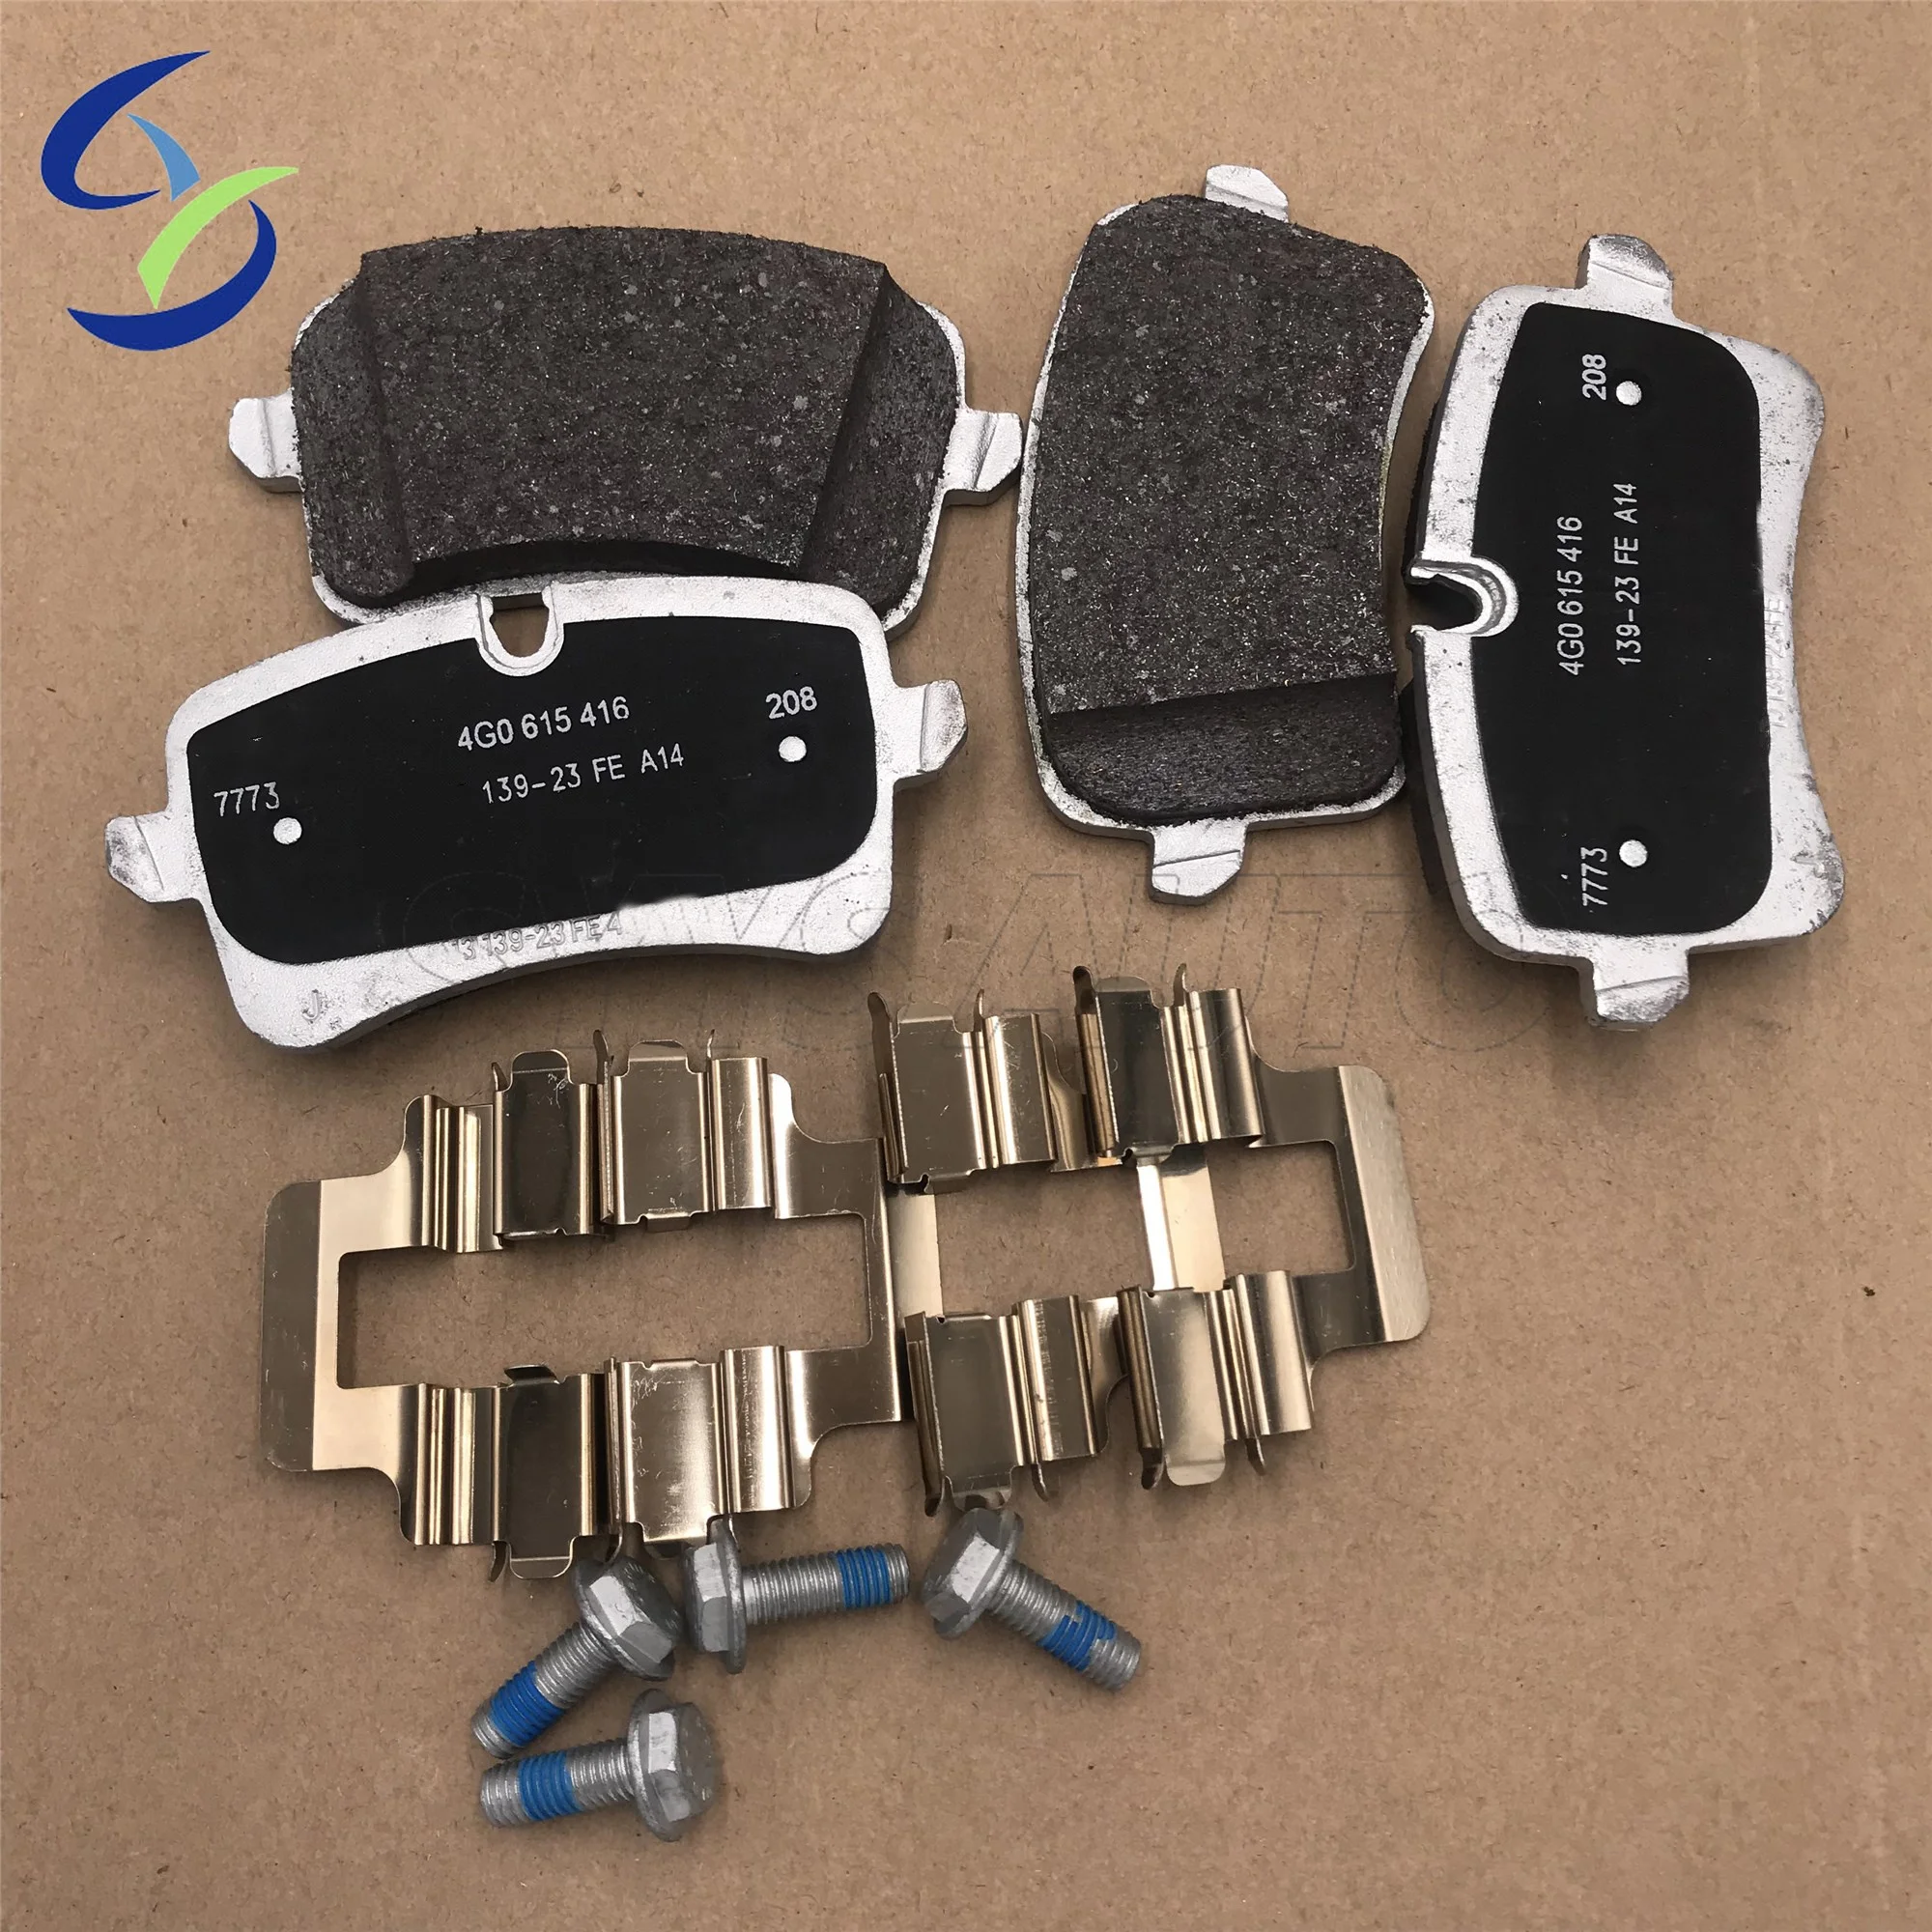 Rear Good Quality Brake Pad 4g0698451 4gd698451 For Audi A6 A7 C7 